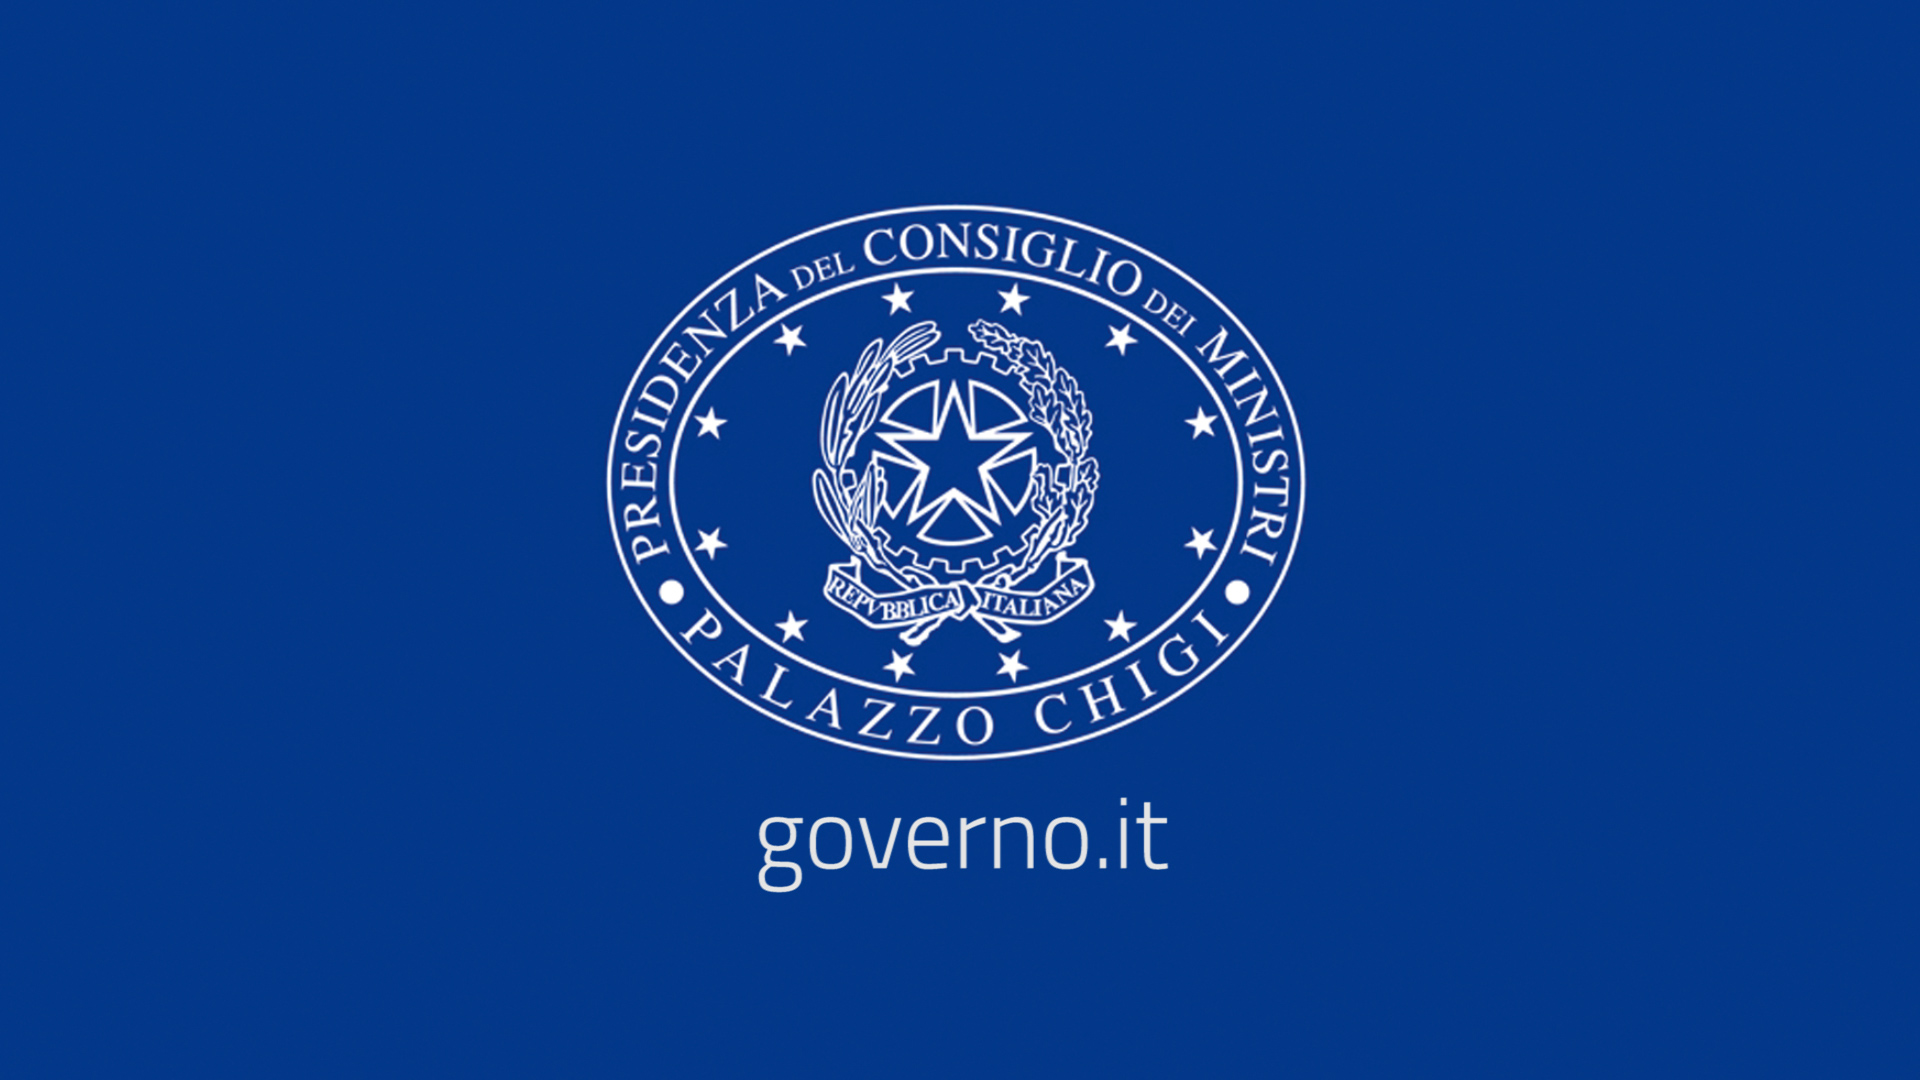 www.governo.it